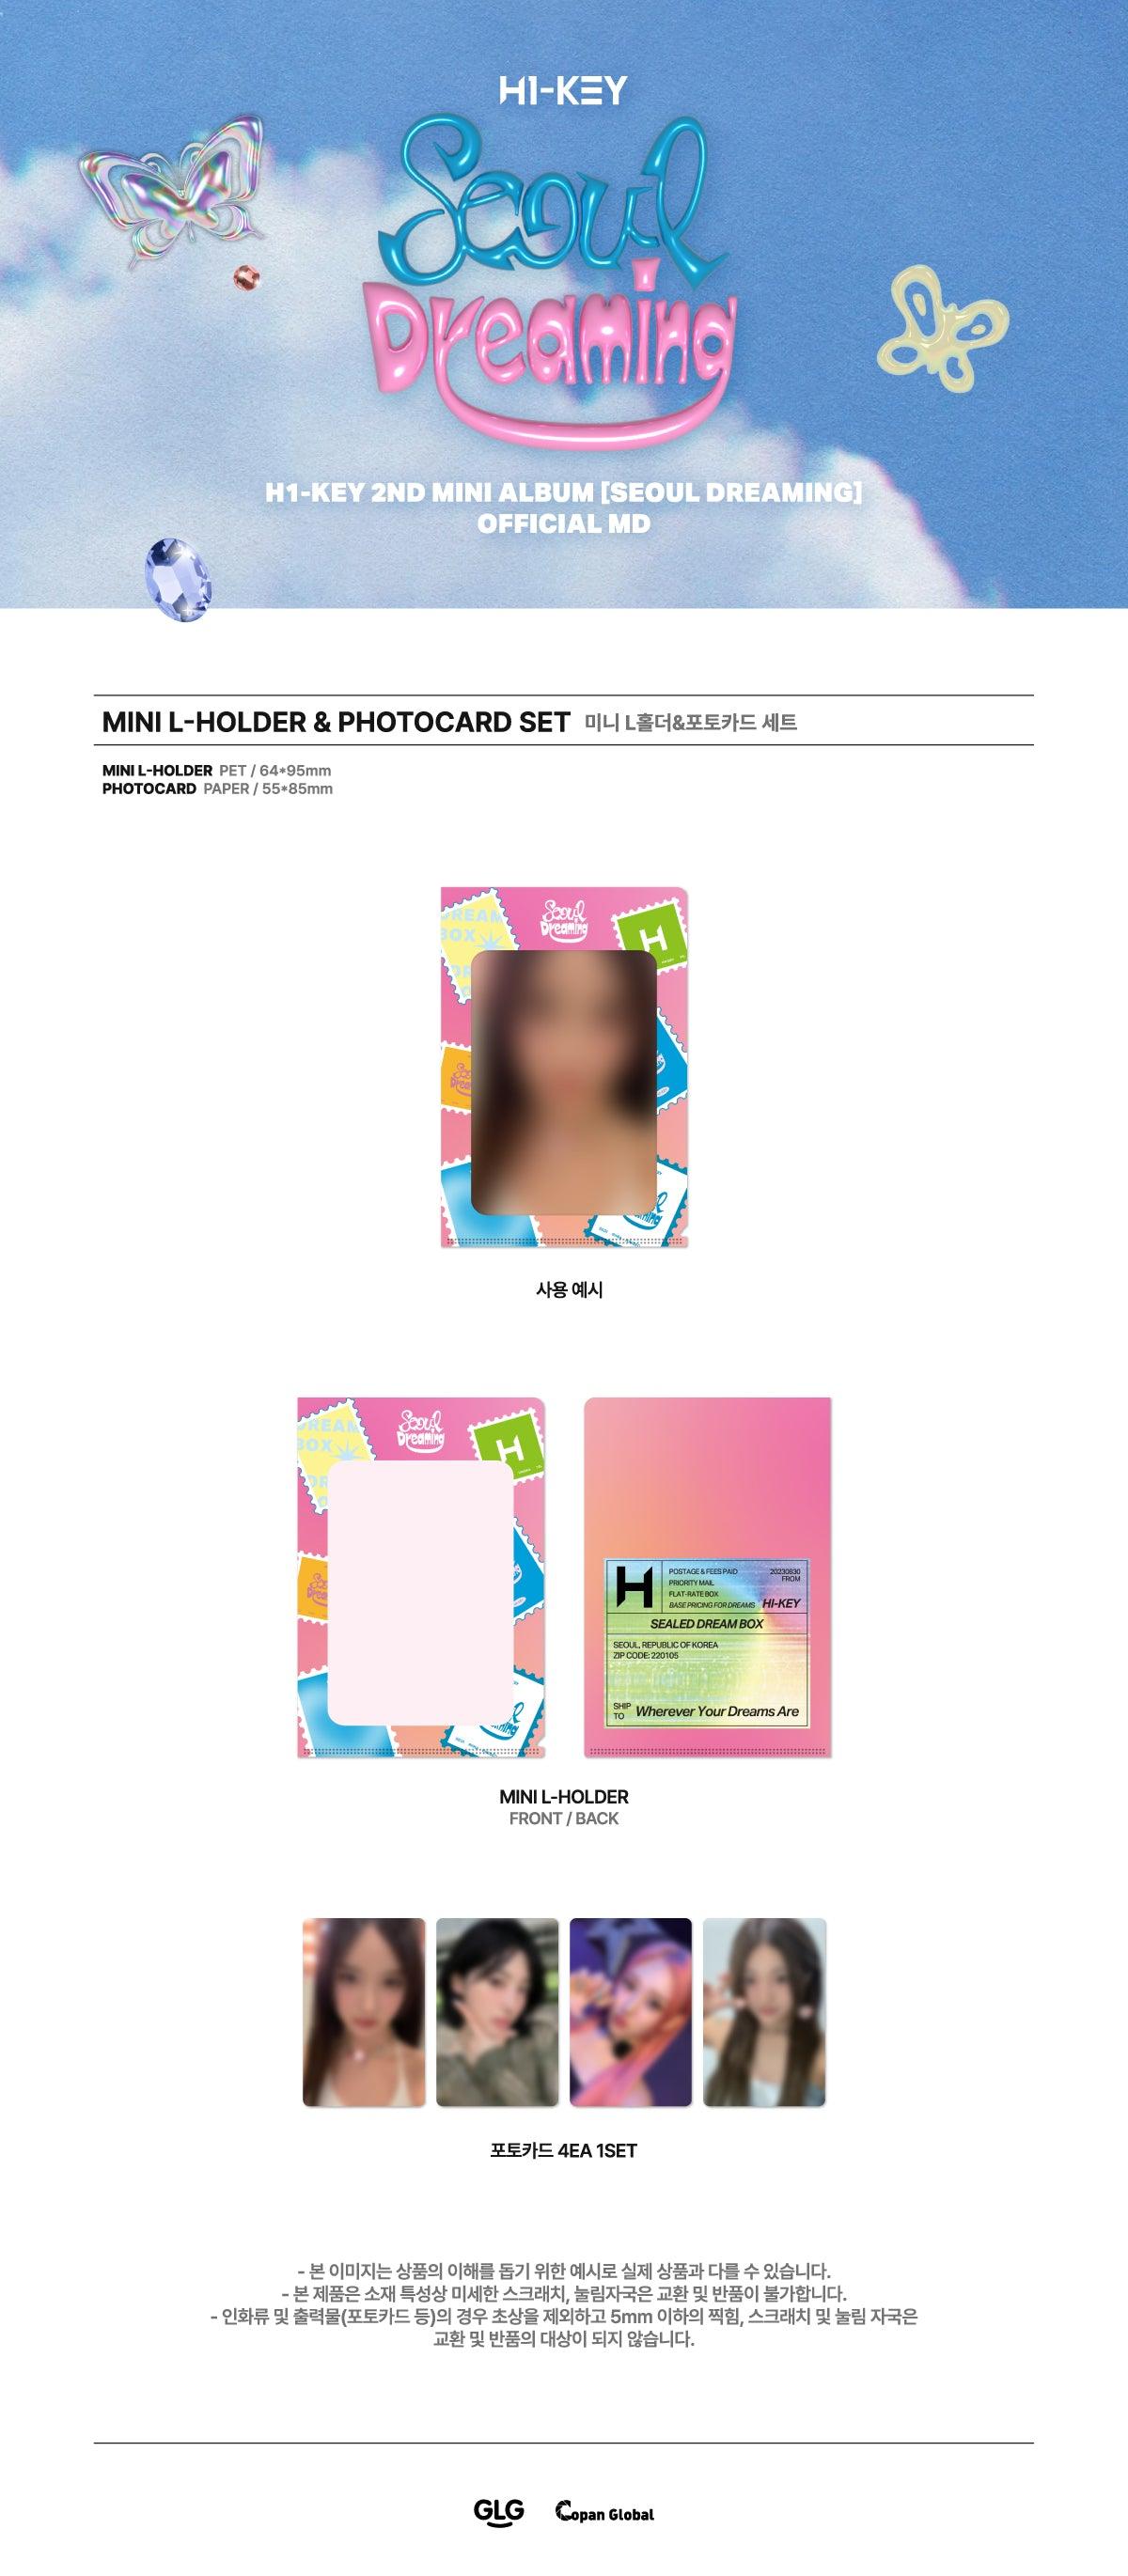 [PRE-ORDER] H1-KEY - SEOUL DREAMING OFFICIAL MD - Shopping Around the World with Goodsnjoy